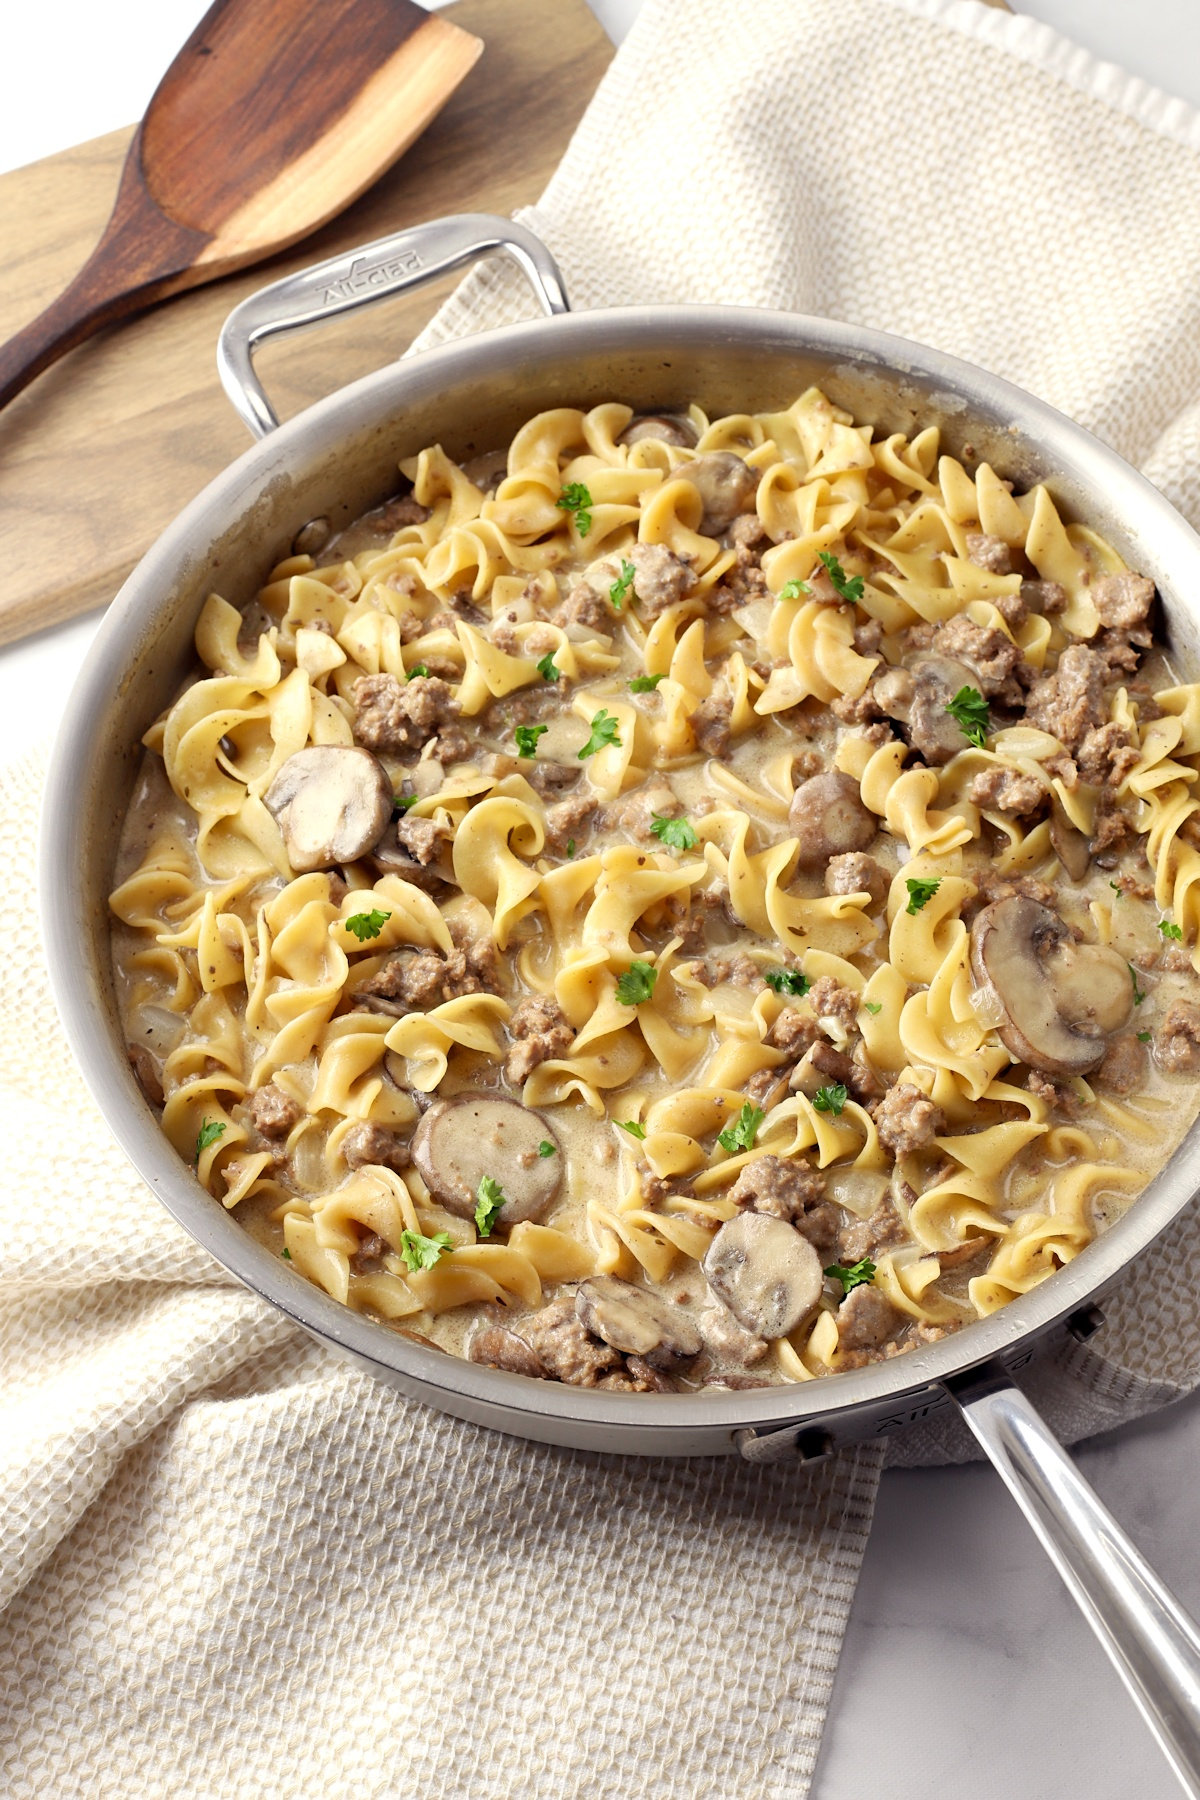 Saute pan filled with ground beef stroganoff.